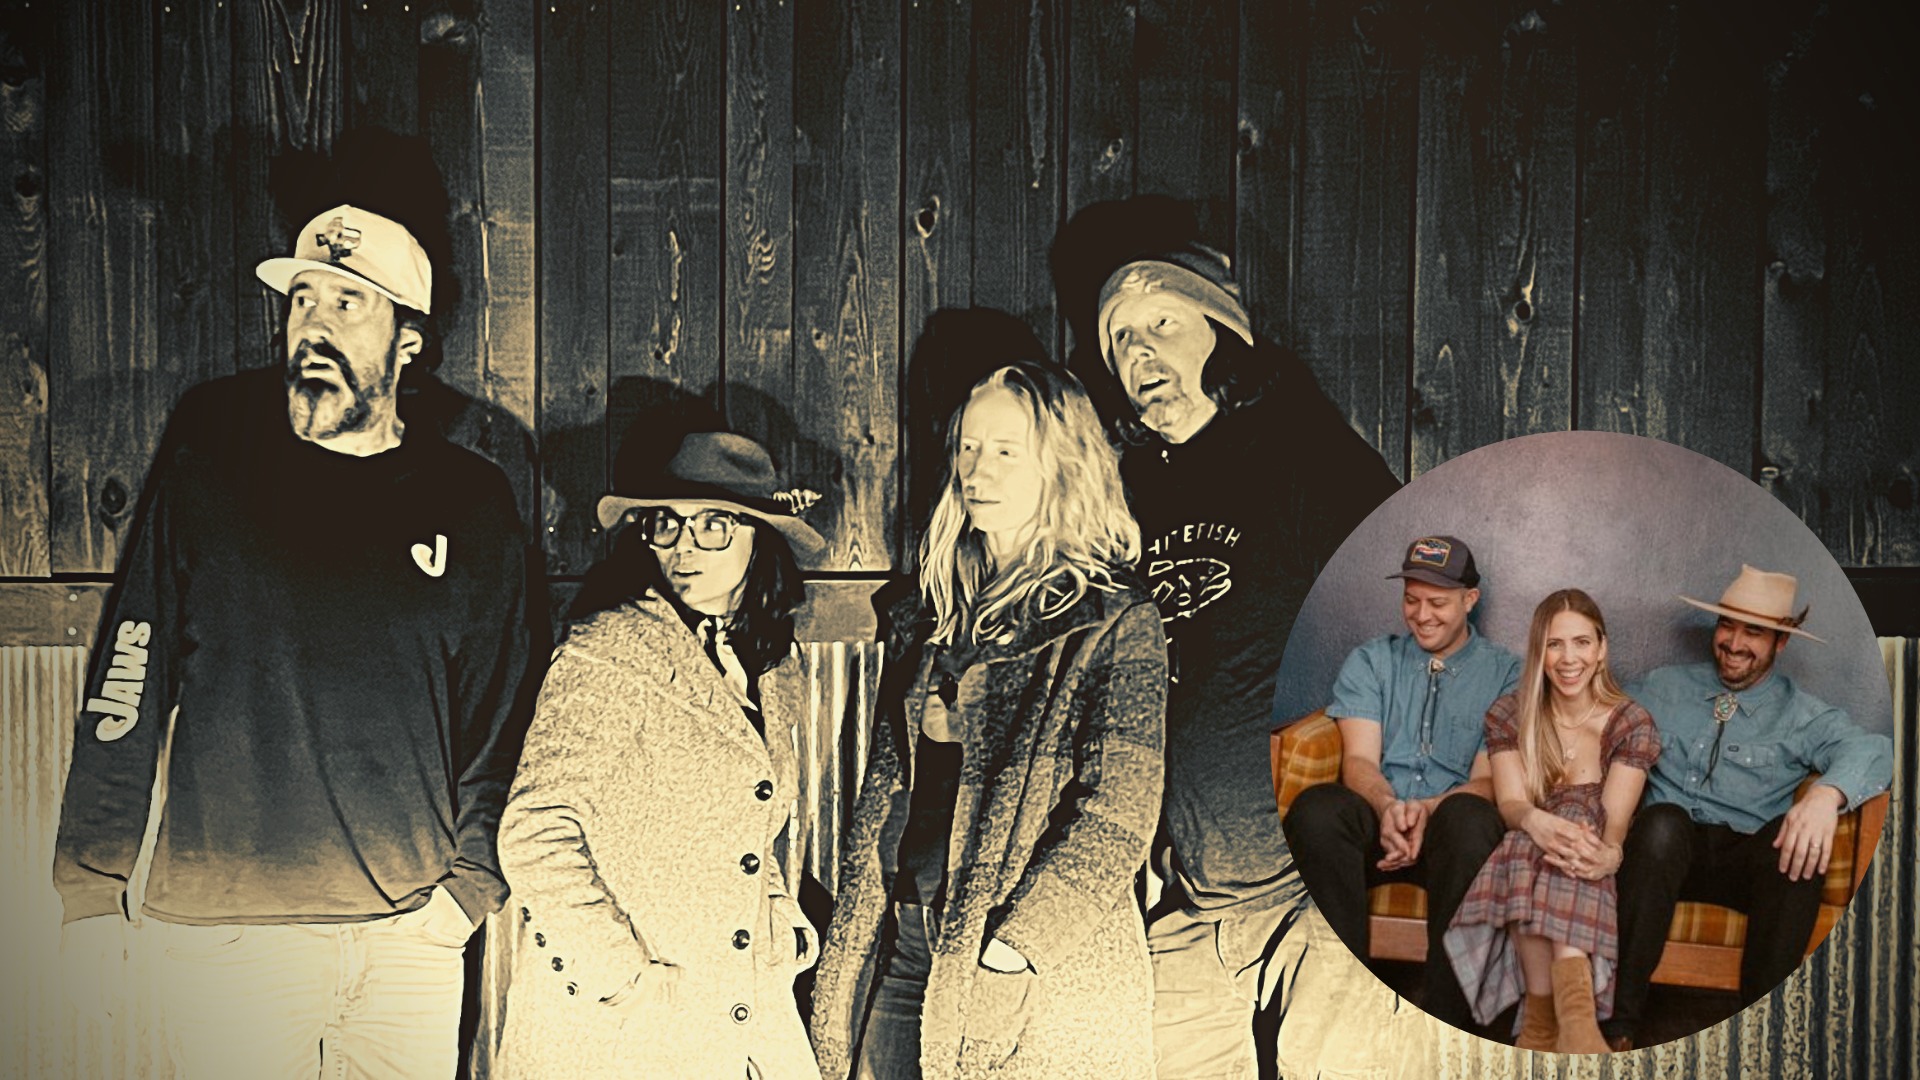 Jamie Wyman Band with Archertown at The Remington Bar in Whitefish, Montana on Saturday, January 14, 2023